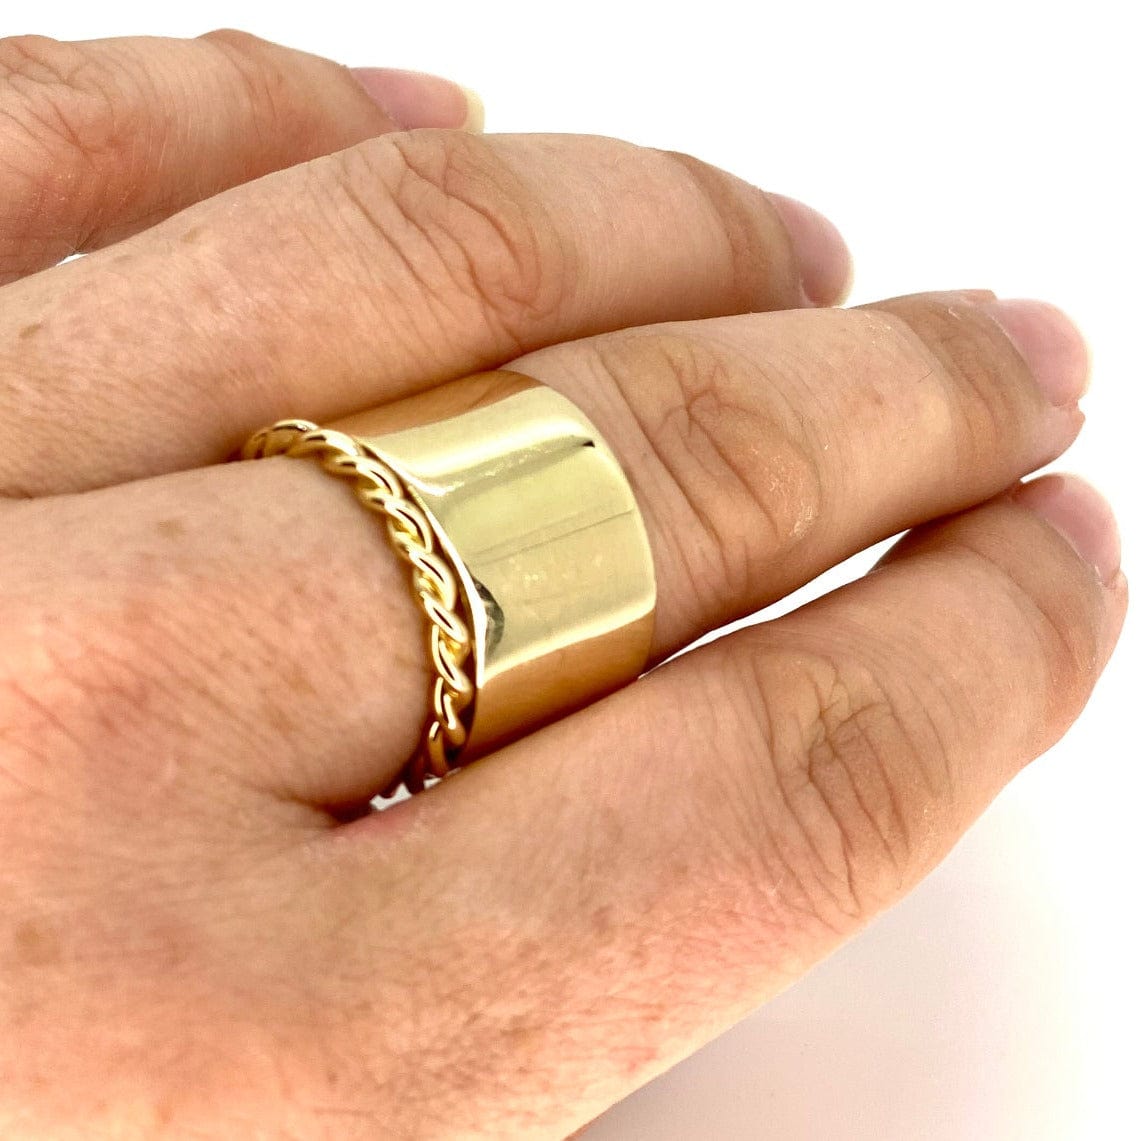 A solid gold twist ring stacked under a solid gold cigar ring on the middle finger of Tamsin Rasor's hand